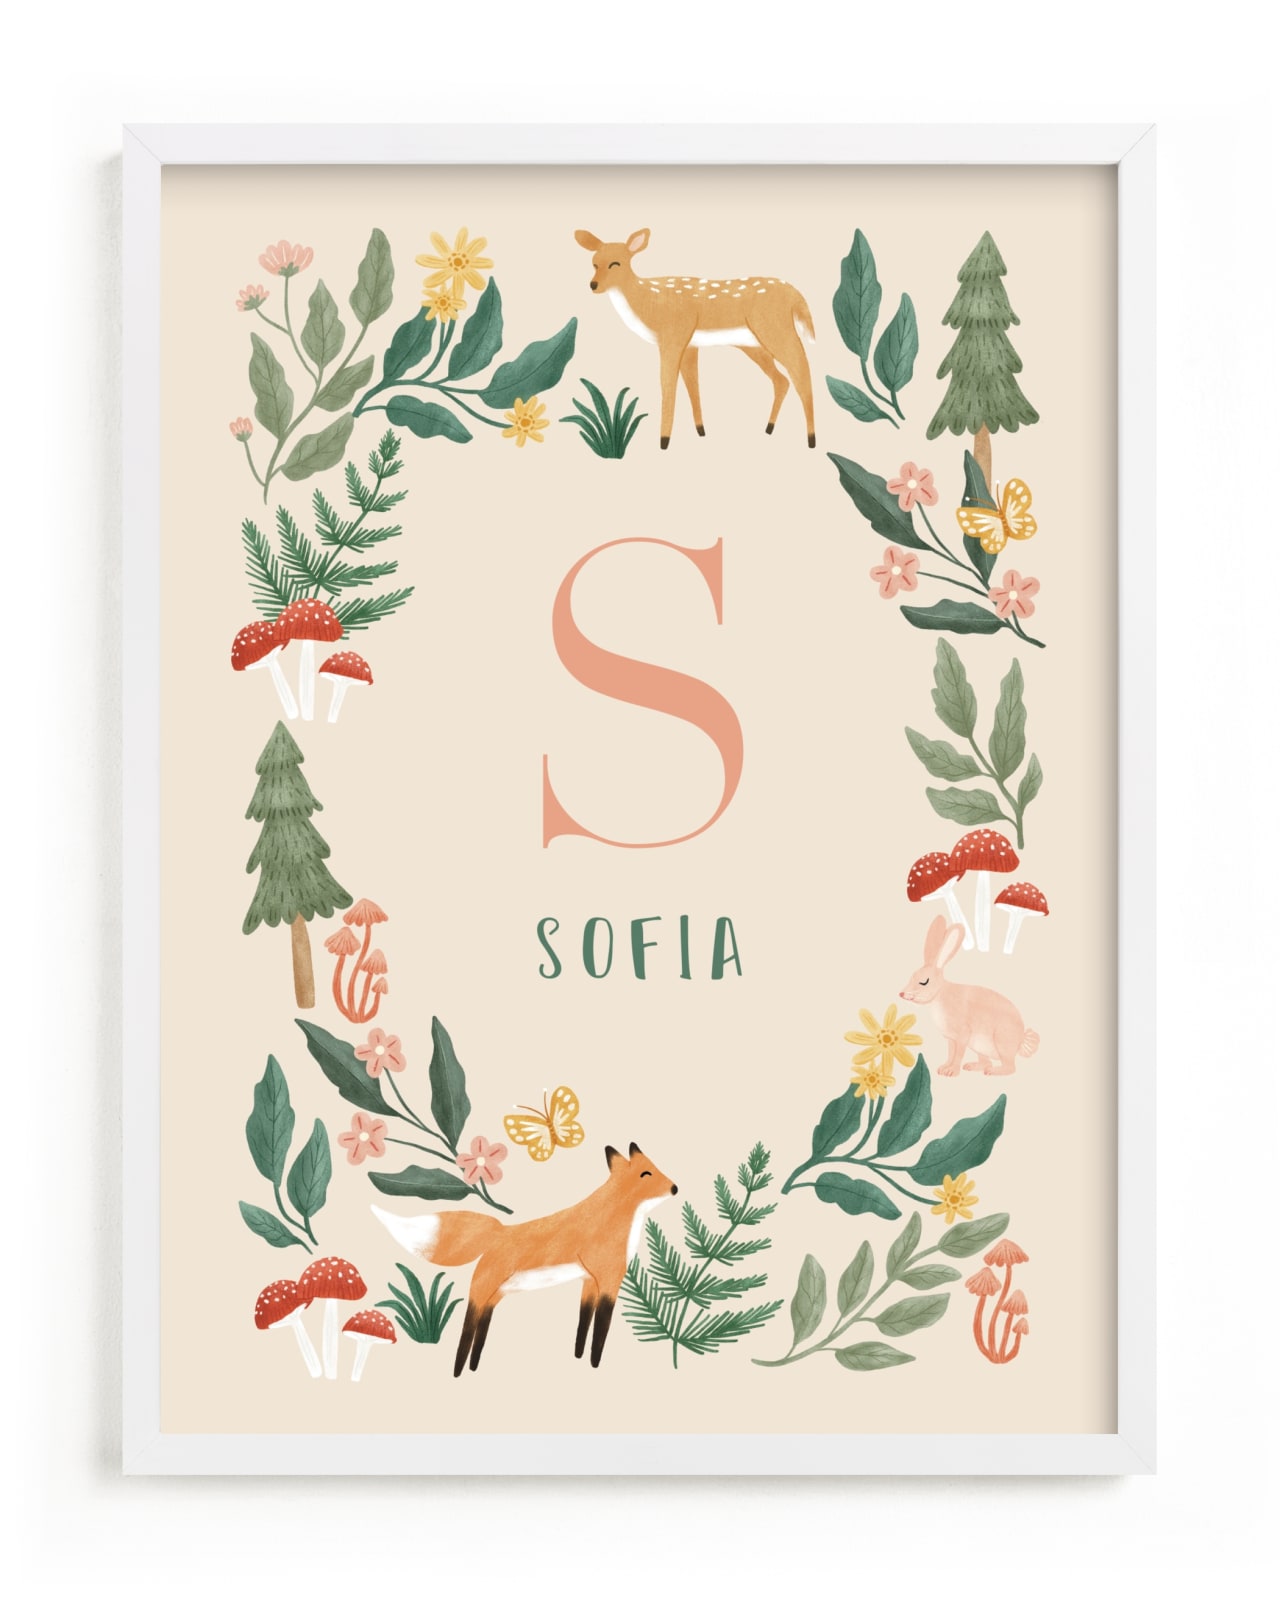 This is a colorful, beige nursery wall art by Elly called Wild Woodland.